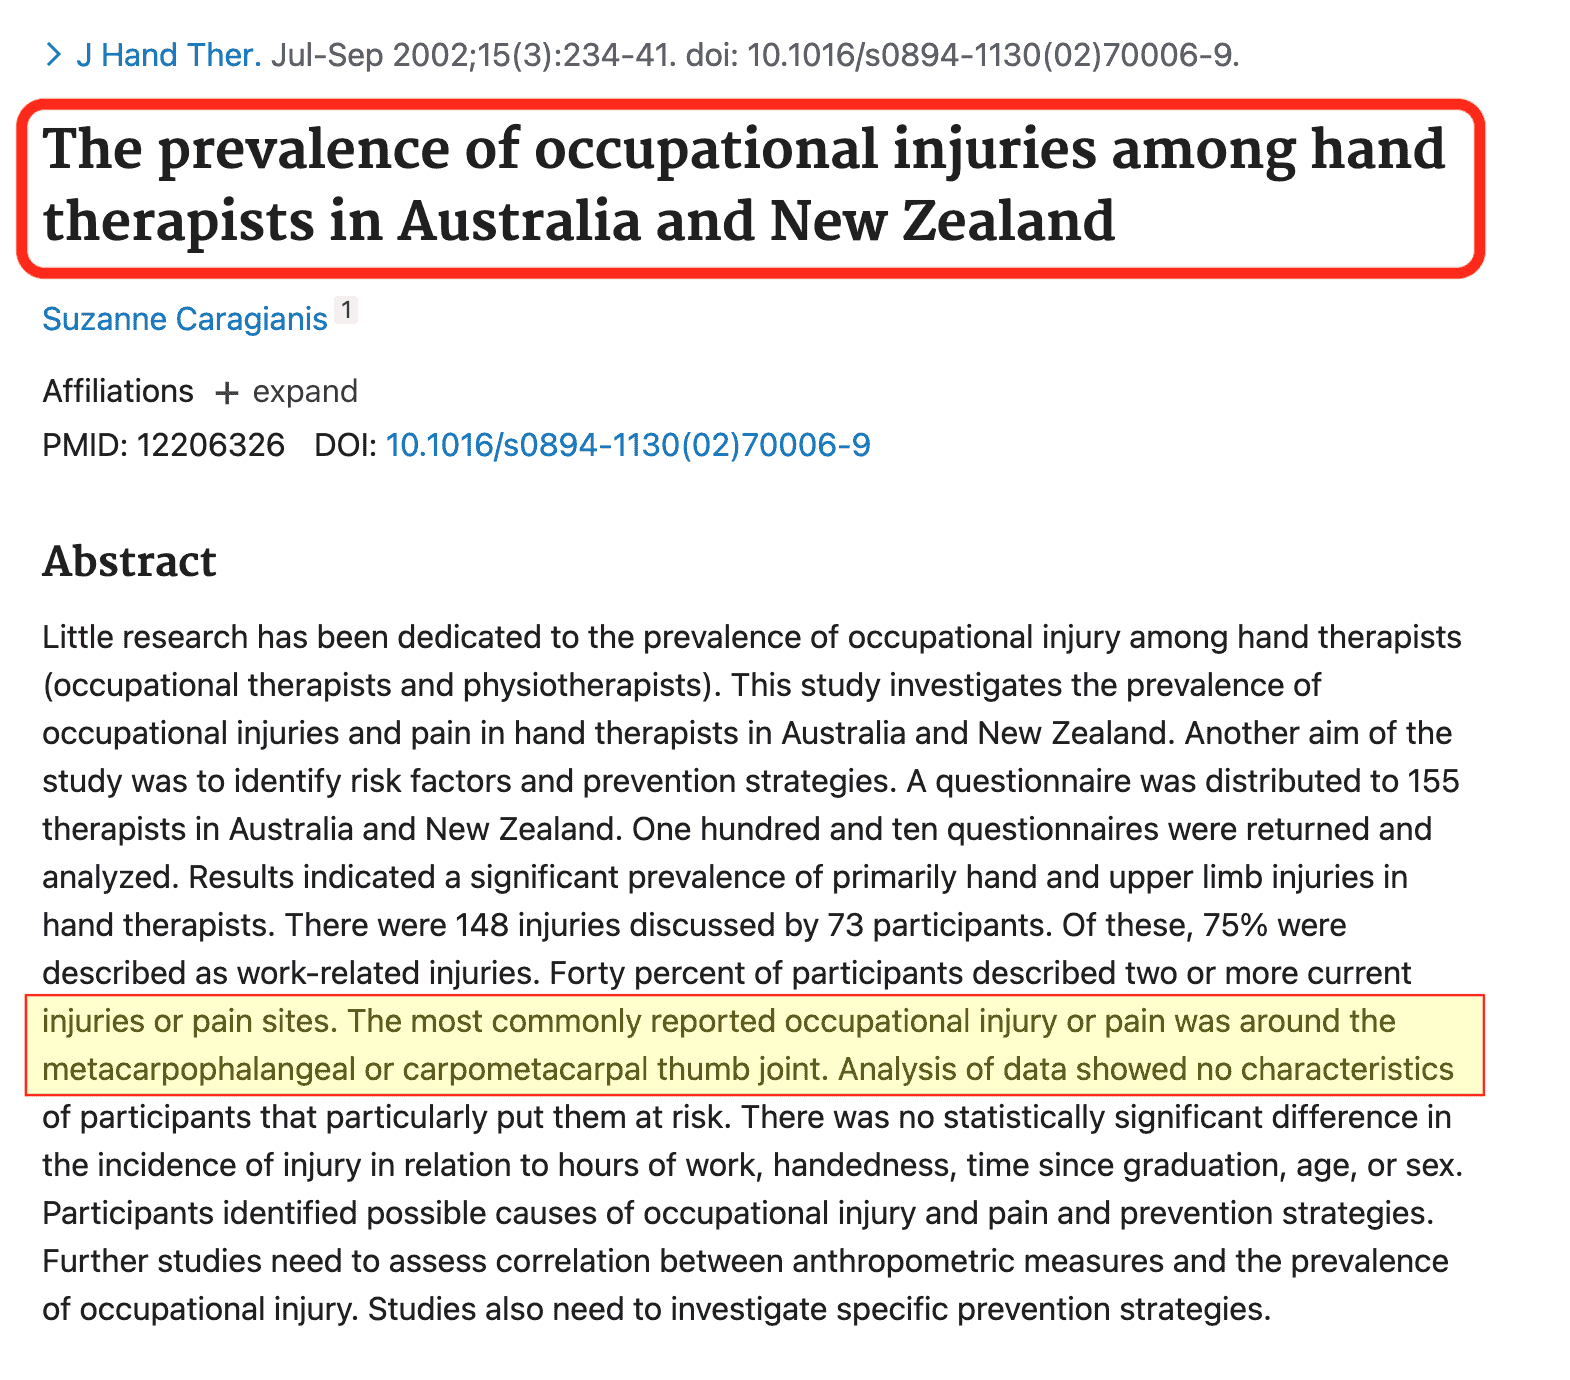 Studio Problemi mano Fisioterapisti The prevalence of occupational injuries among hand therapists in Australia and New Zealand - Journal of Hand Therapy